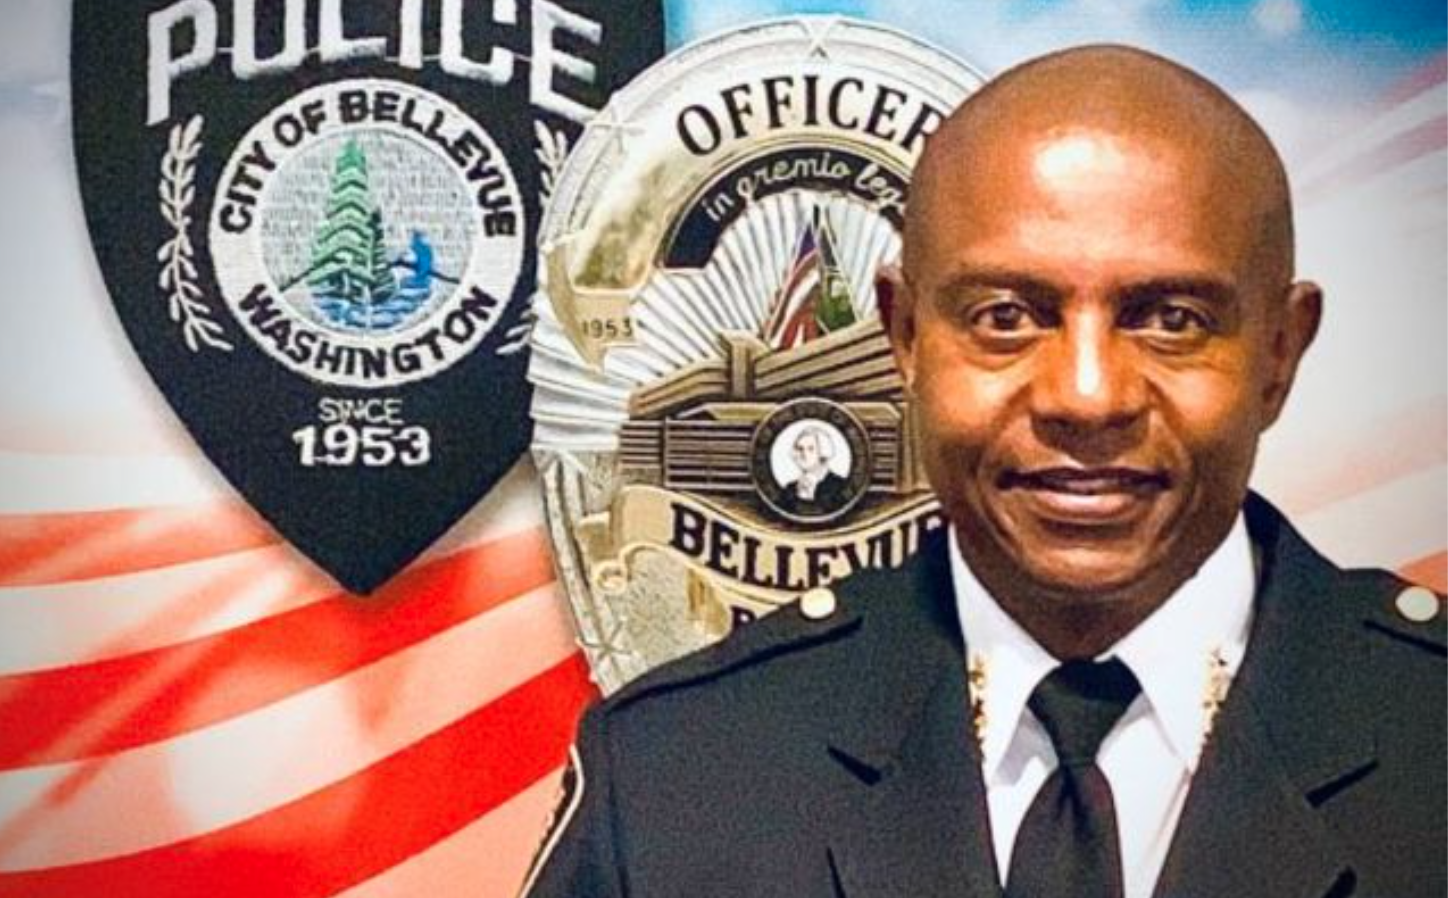 Interim Chief Shirley Appointed to Lead Bellevue Police Department after Nationwide Search